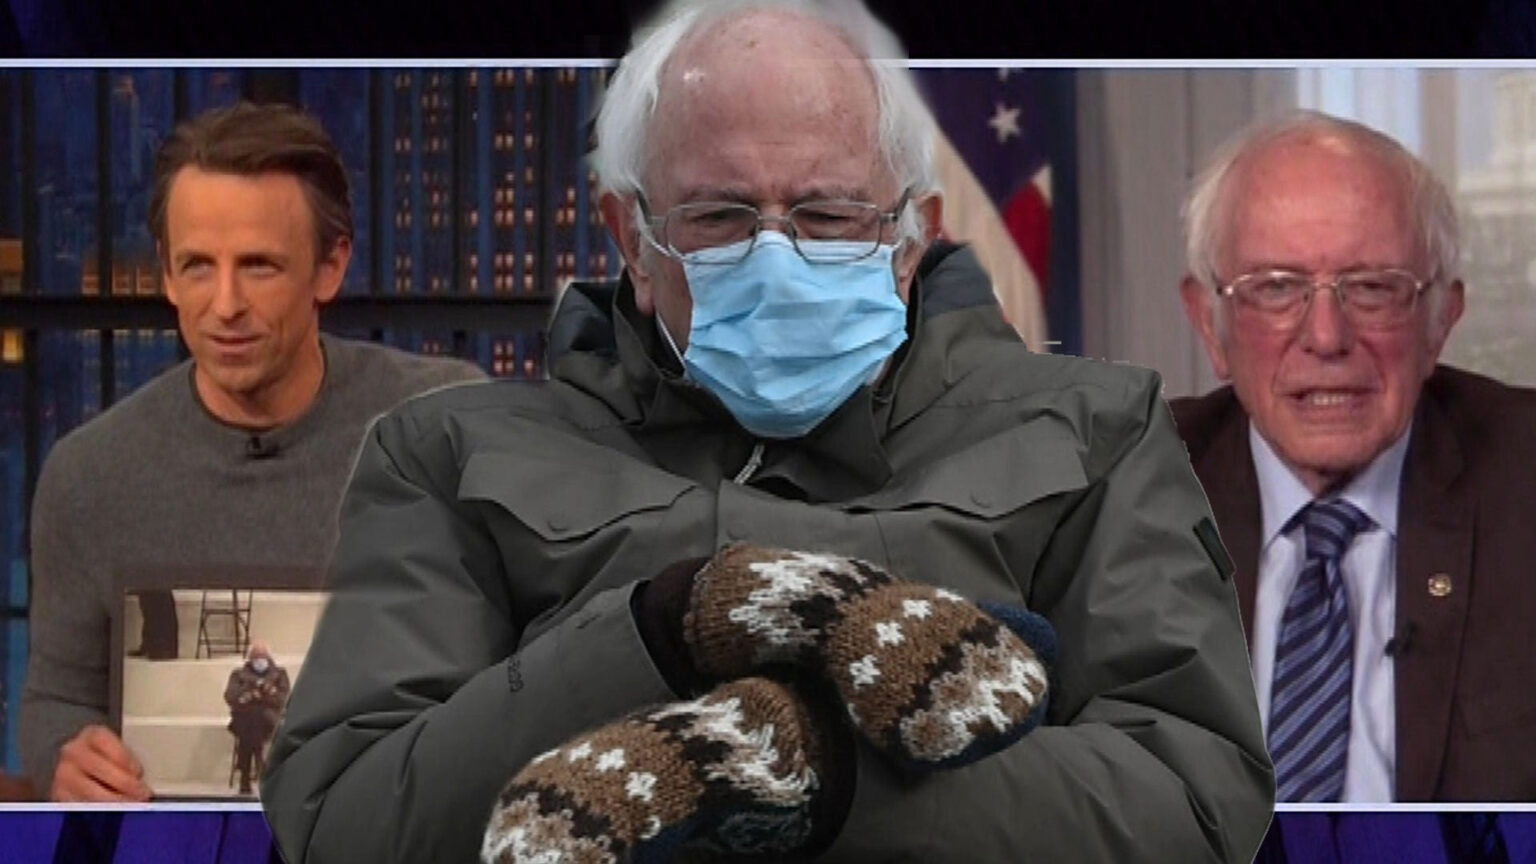 The former presidential nominee is plastering our feeds. Here are all the places Bernie Sanders has been . . . in the form of memes.